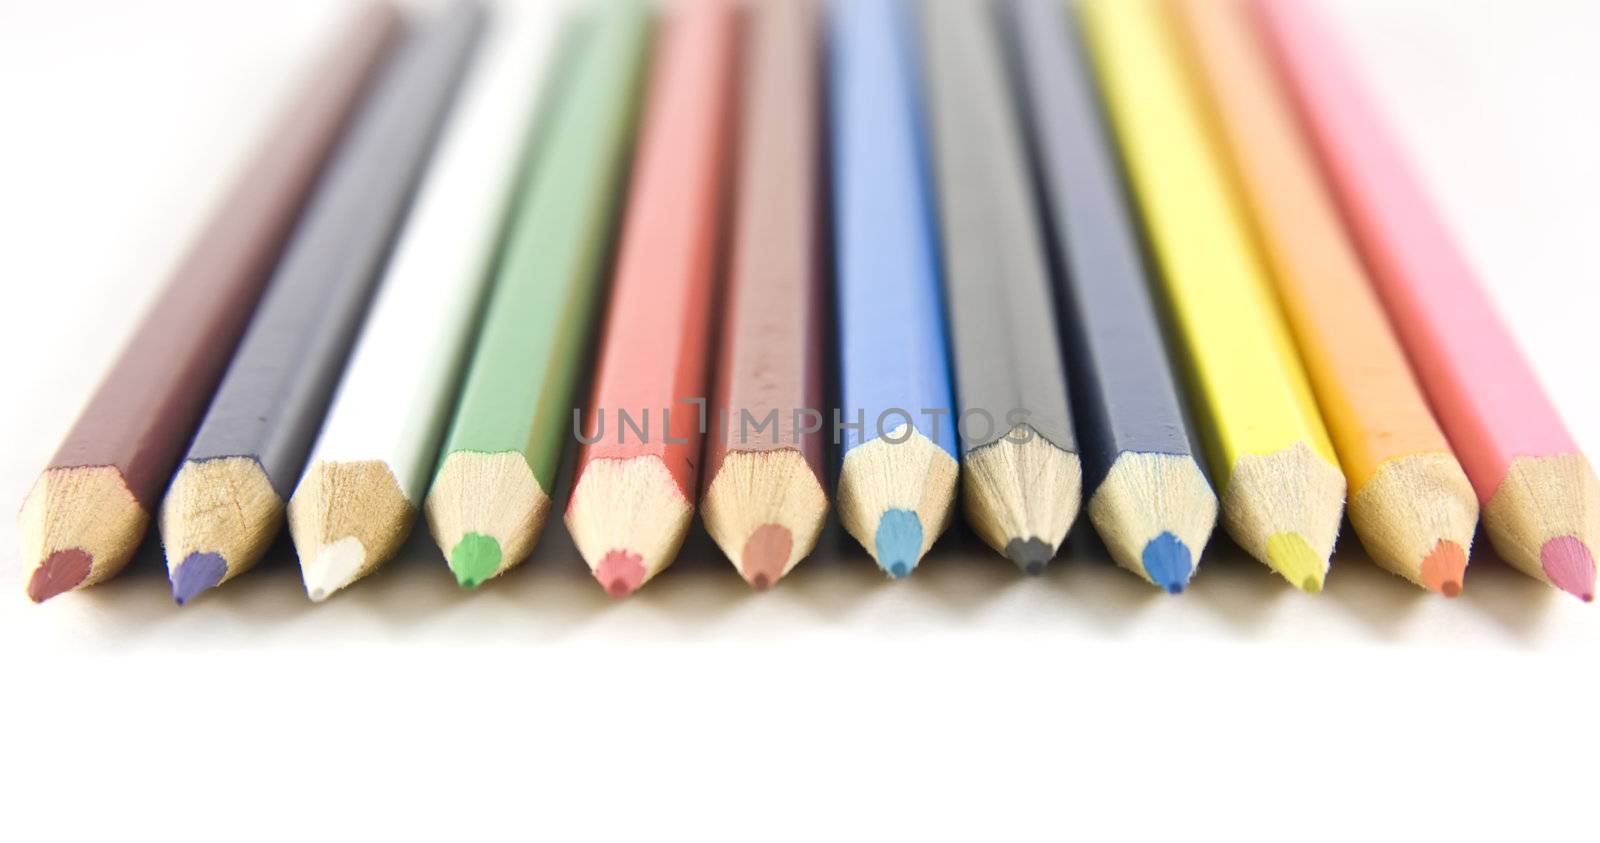 Set of coloured pencils with shadow on white background